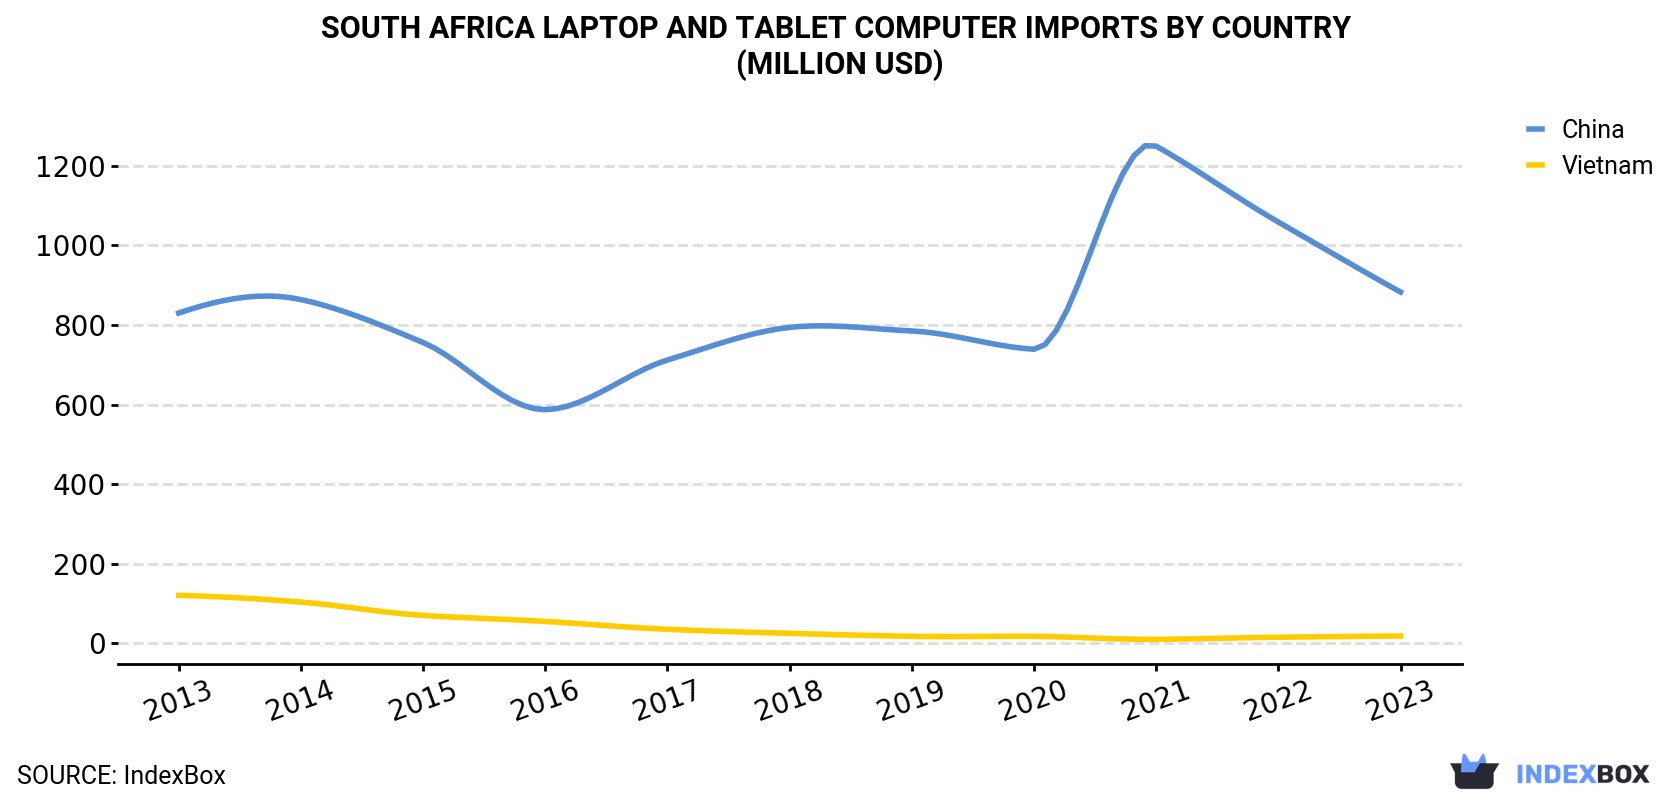 South Africa Laptop and Tablet Computer Imports By Country (Million USD)